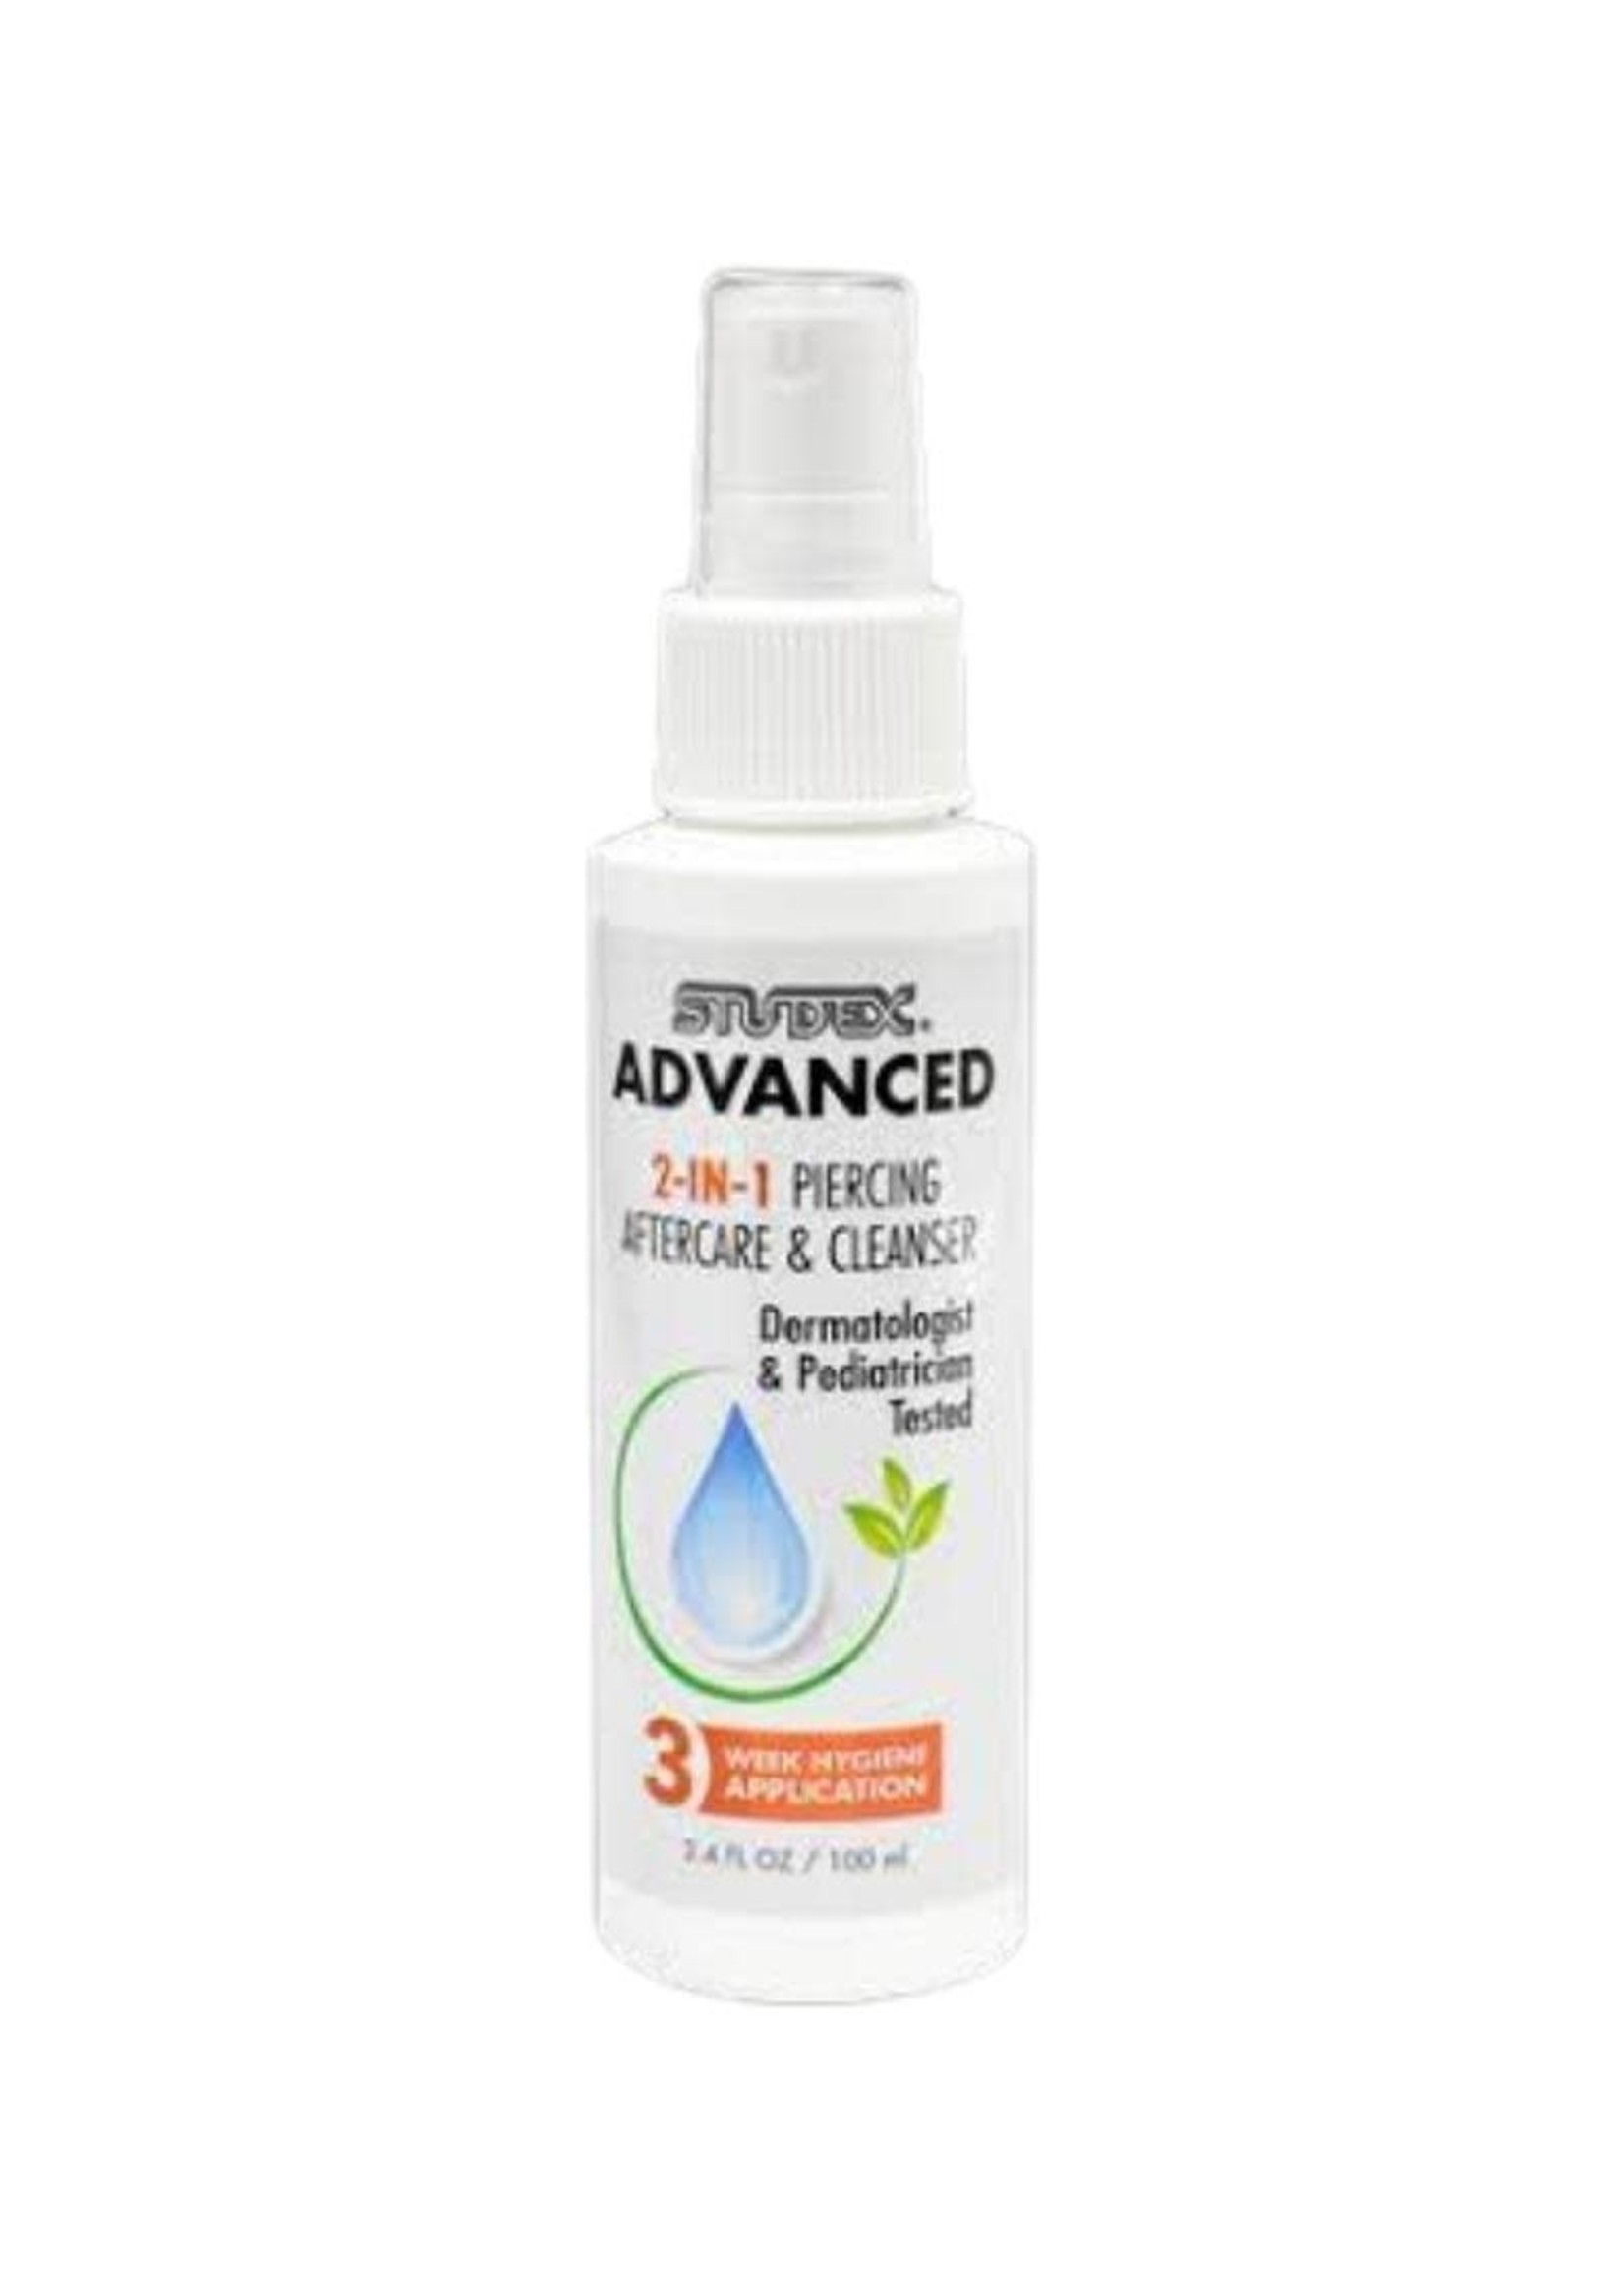 Studex Studex Advanced 2-In-1 Aftercare & Cleanser Spray 100ml